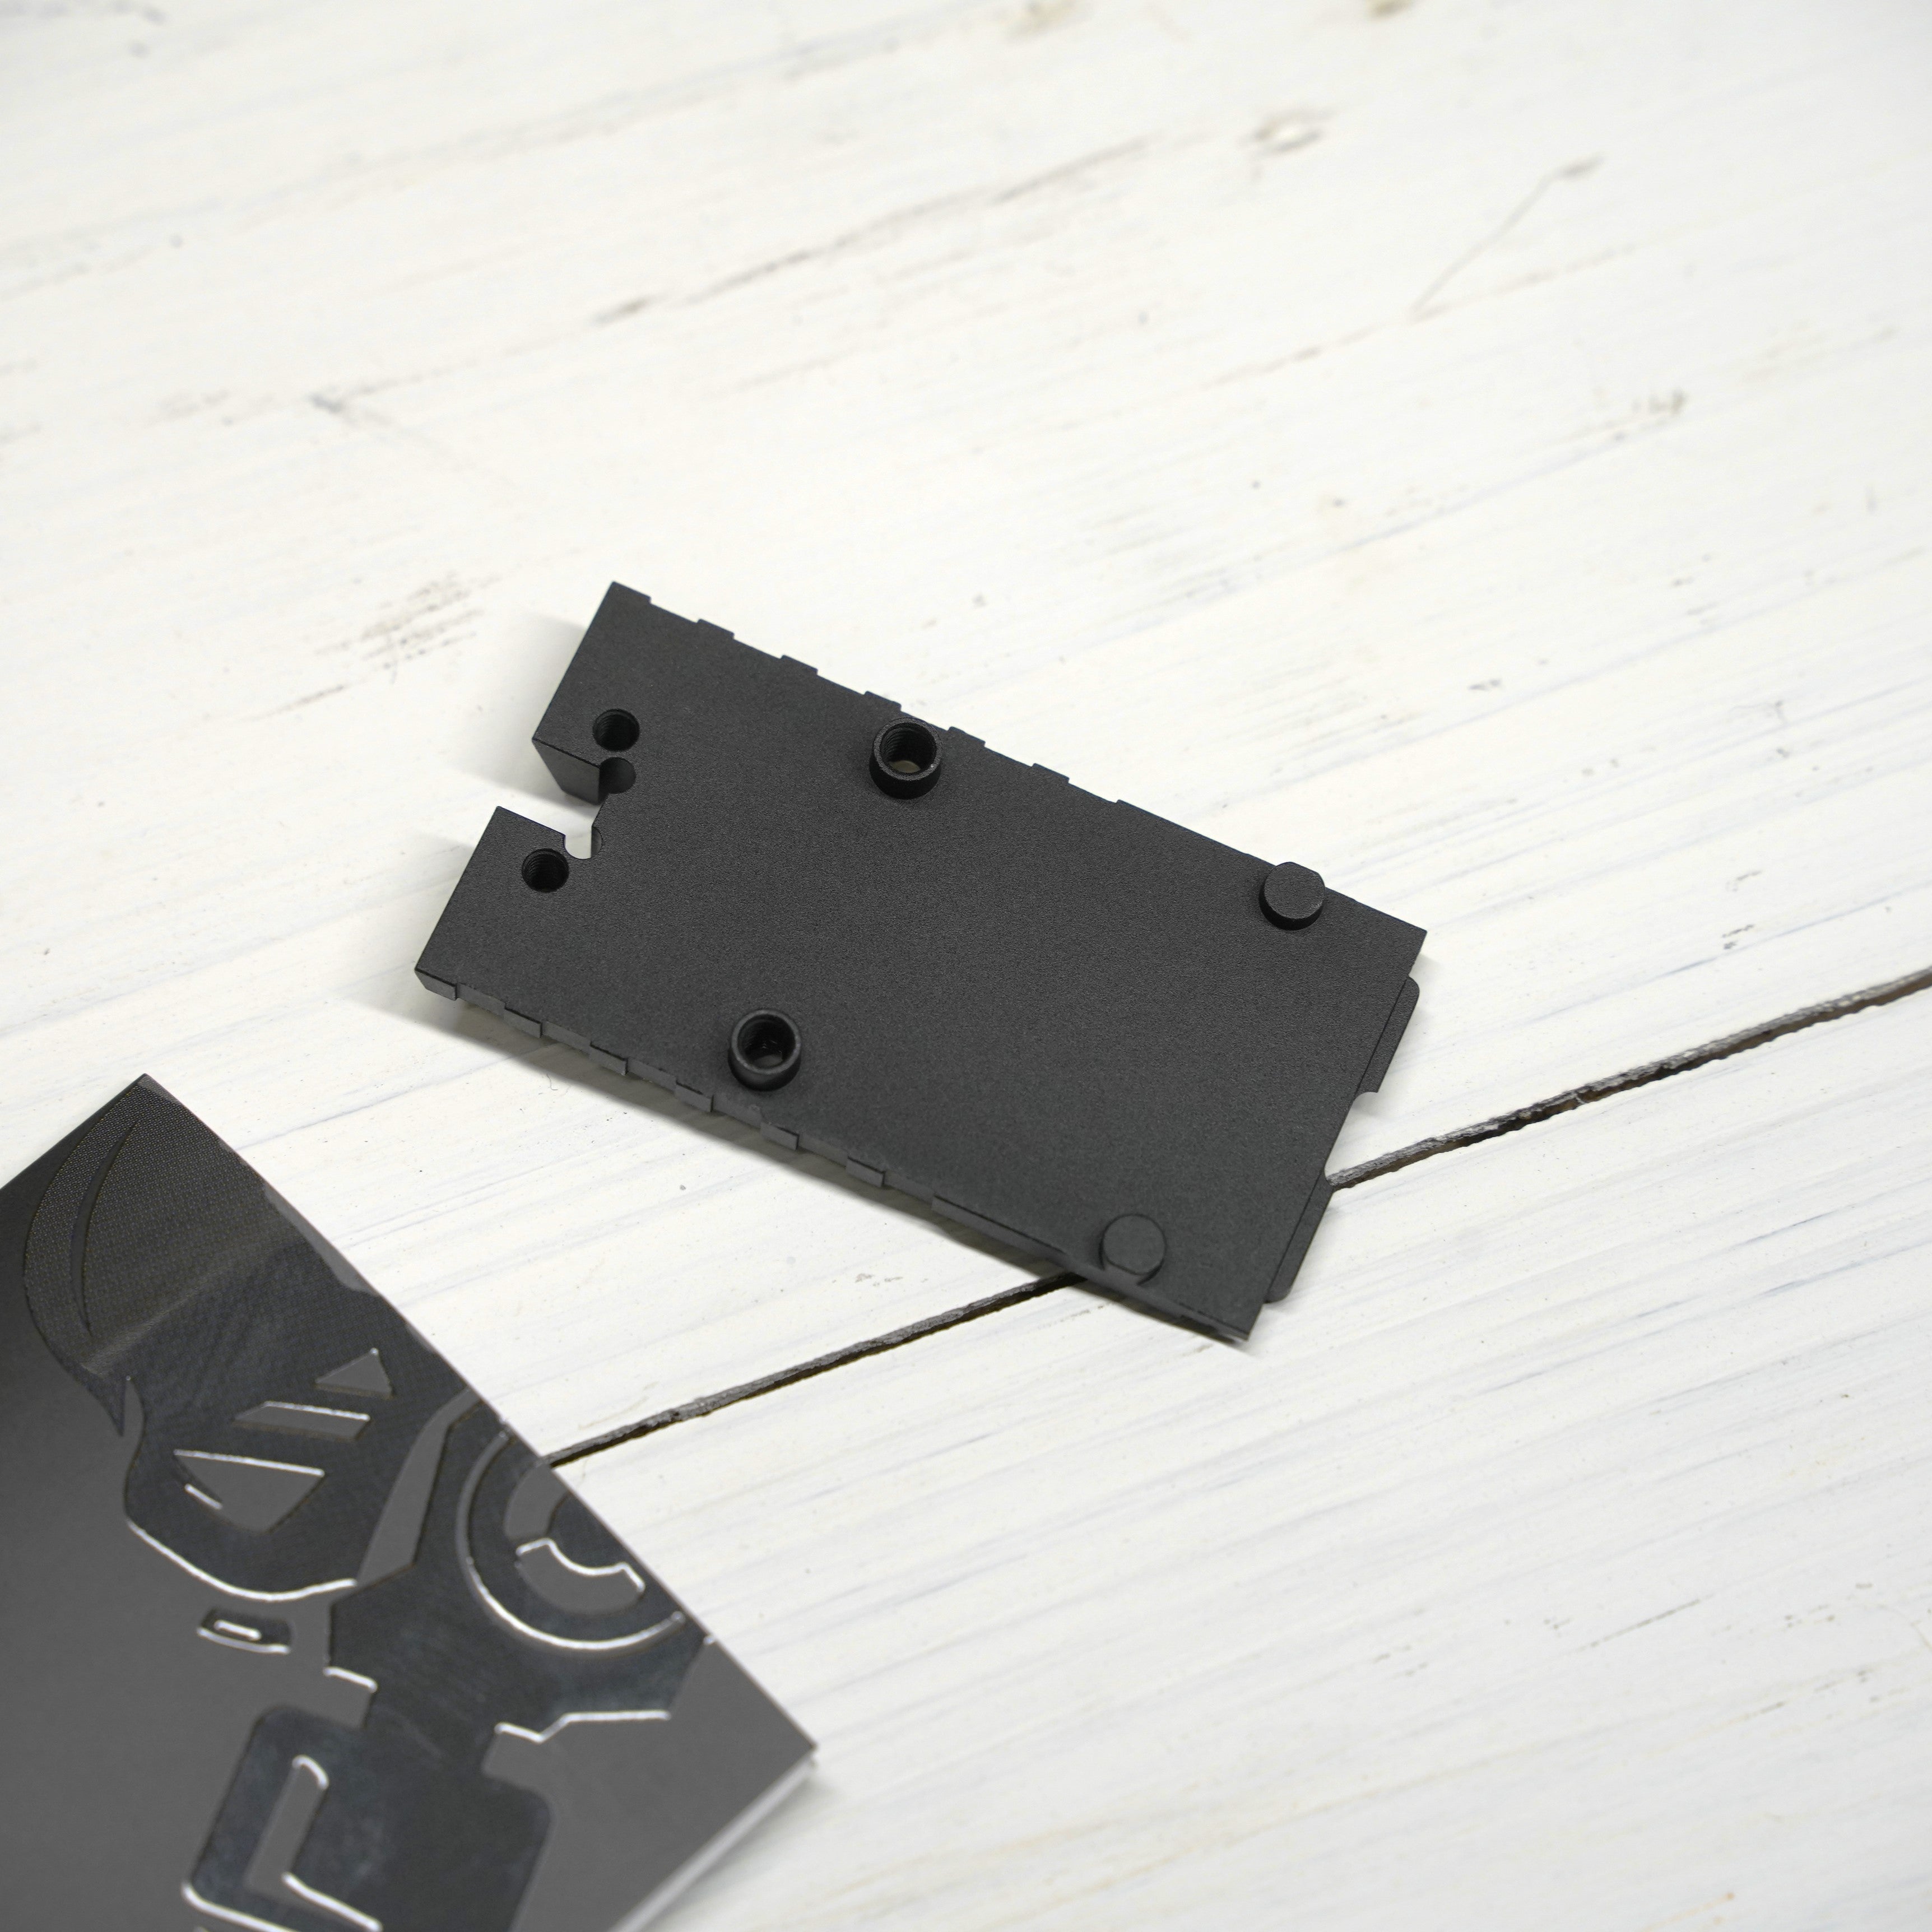 Revanchist Airsoft RMR / SRO Mount Plate for TM G17 G5 GBB